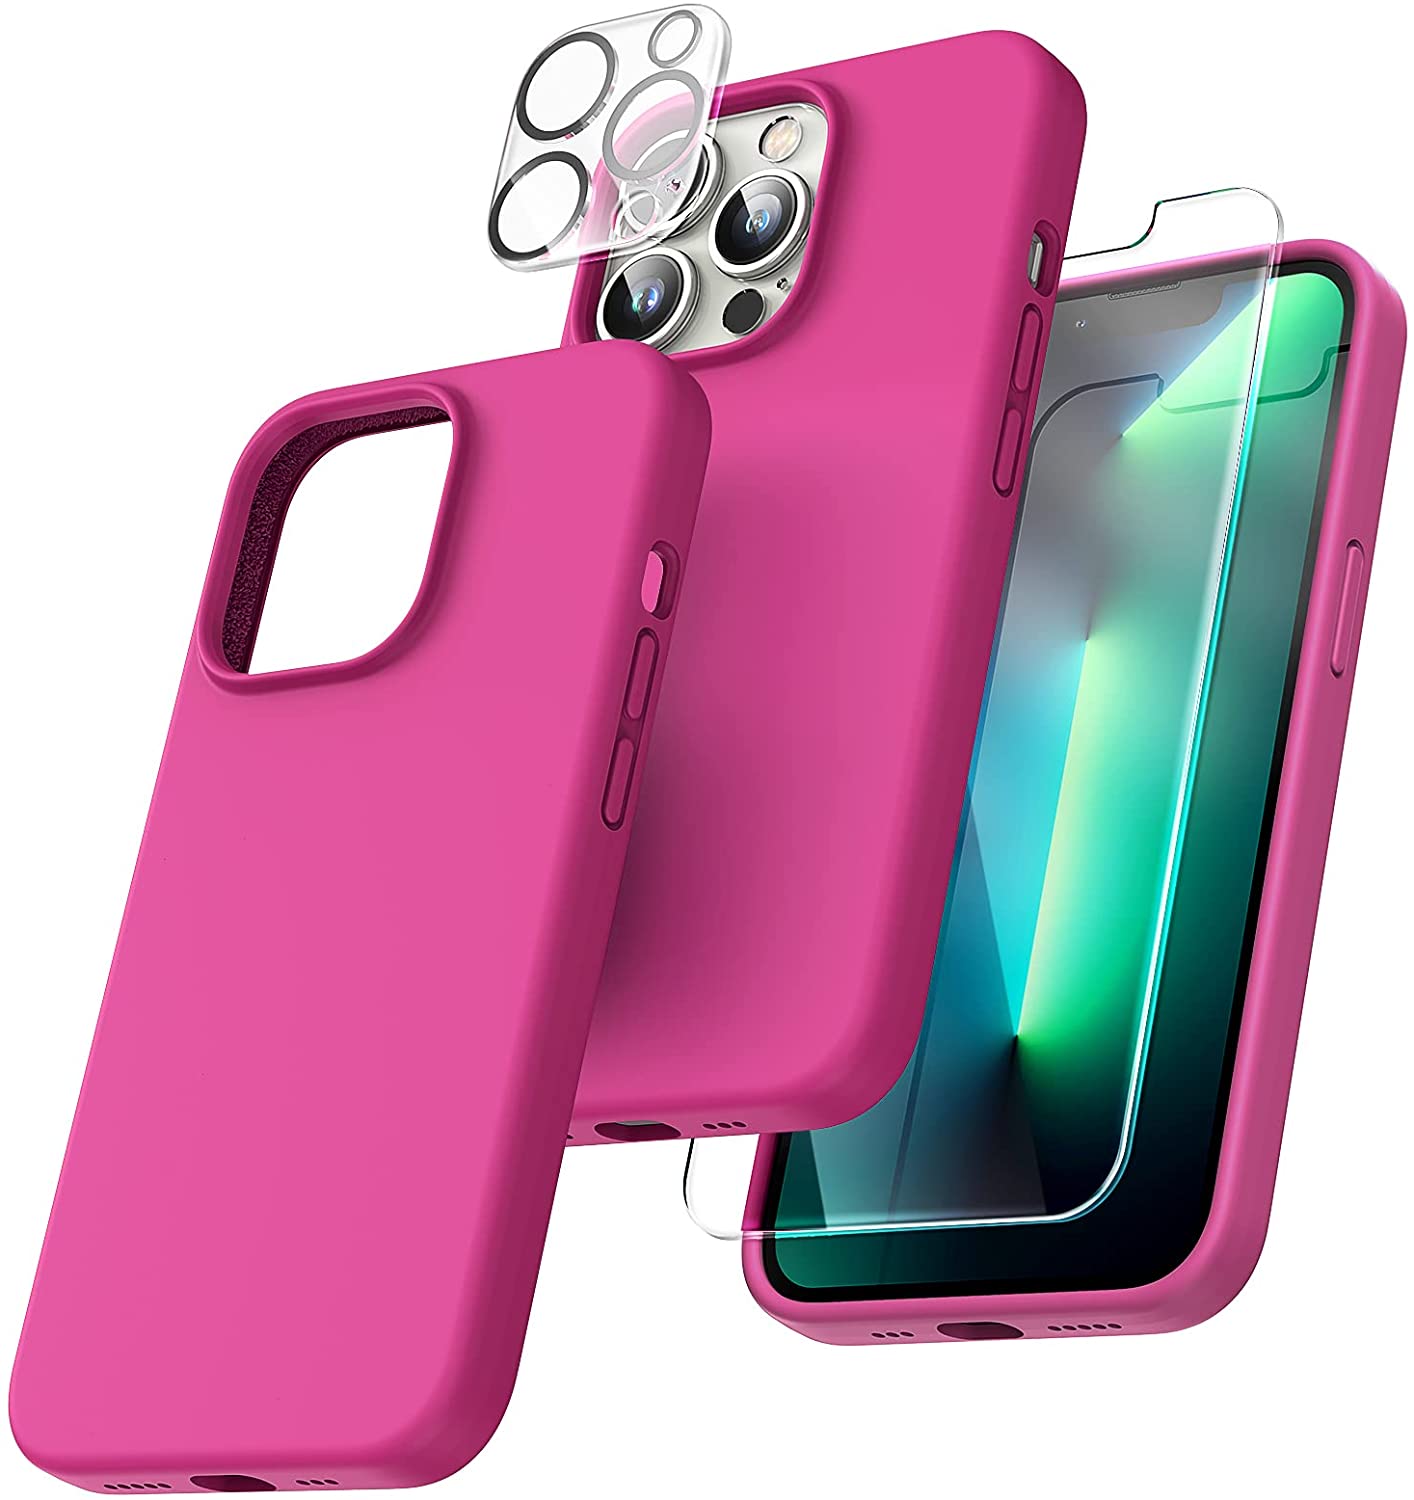 TOCOL [5 in 1] for iPhone 13 Pro Case, with 2 Pack Screen Protector + 2 Pack Camera Lens Protector, Slim Silicone Phone Case iPhone 13 Pro 6.1 Inch, [Anti-Scratch] [Drop Protection], Hot Pink